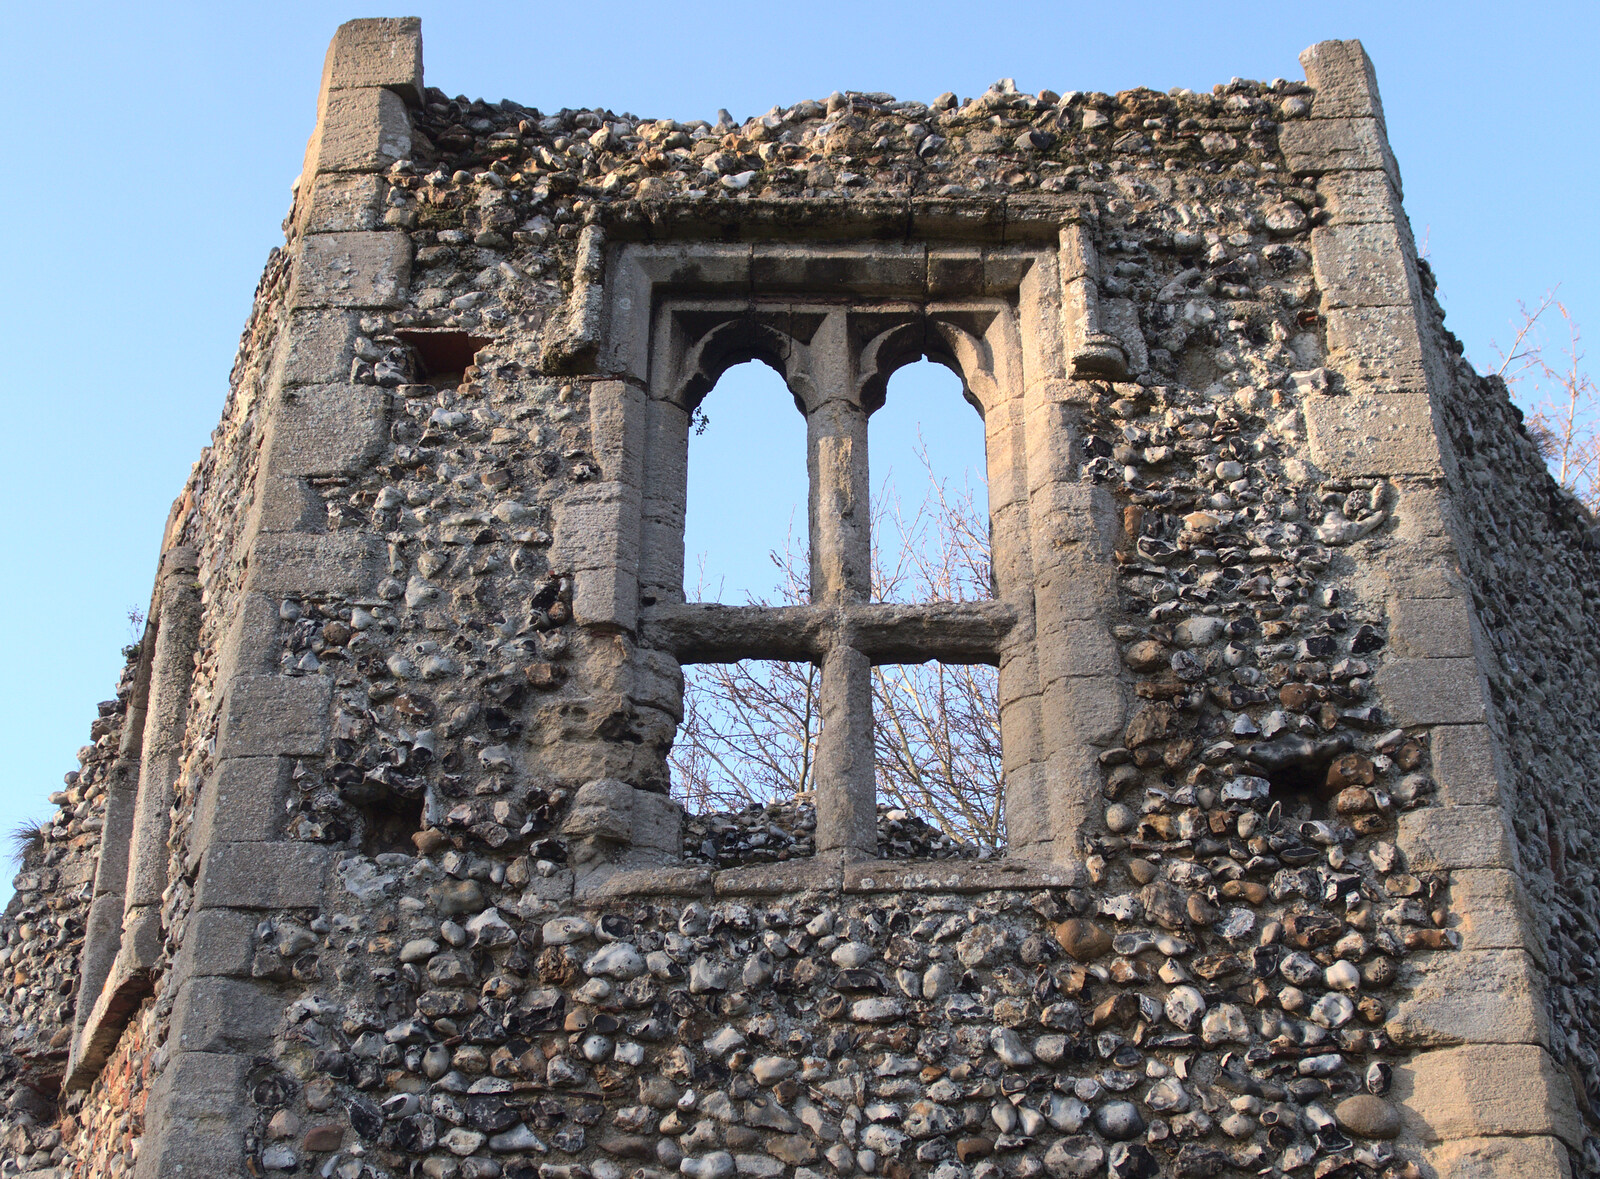 Part of the Abbey ruins from A Trip to Abbey Gardens, Bury St. Edmunds, Suffolk - 20th December 2014